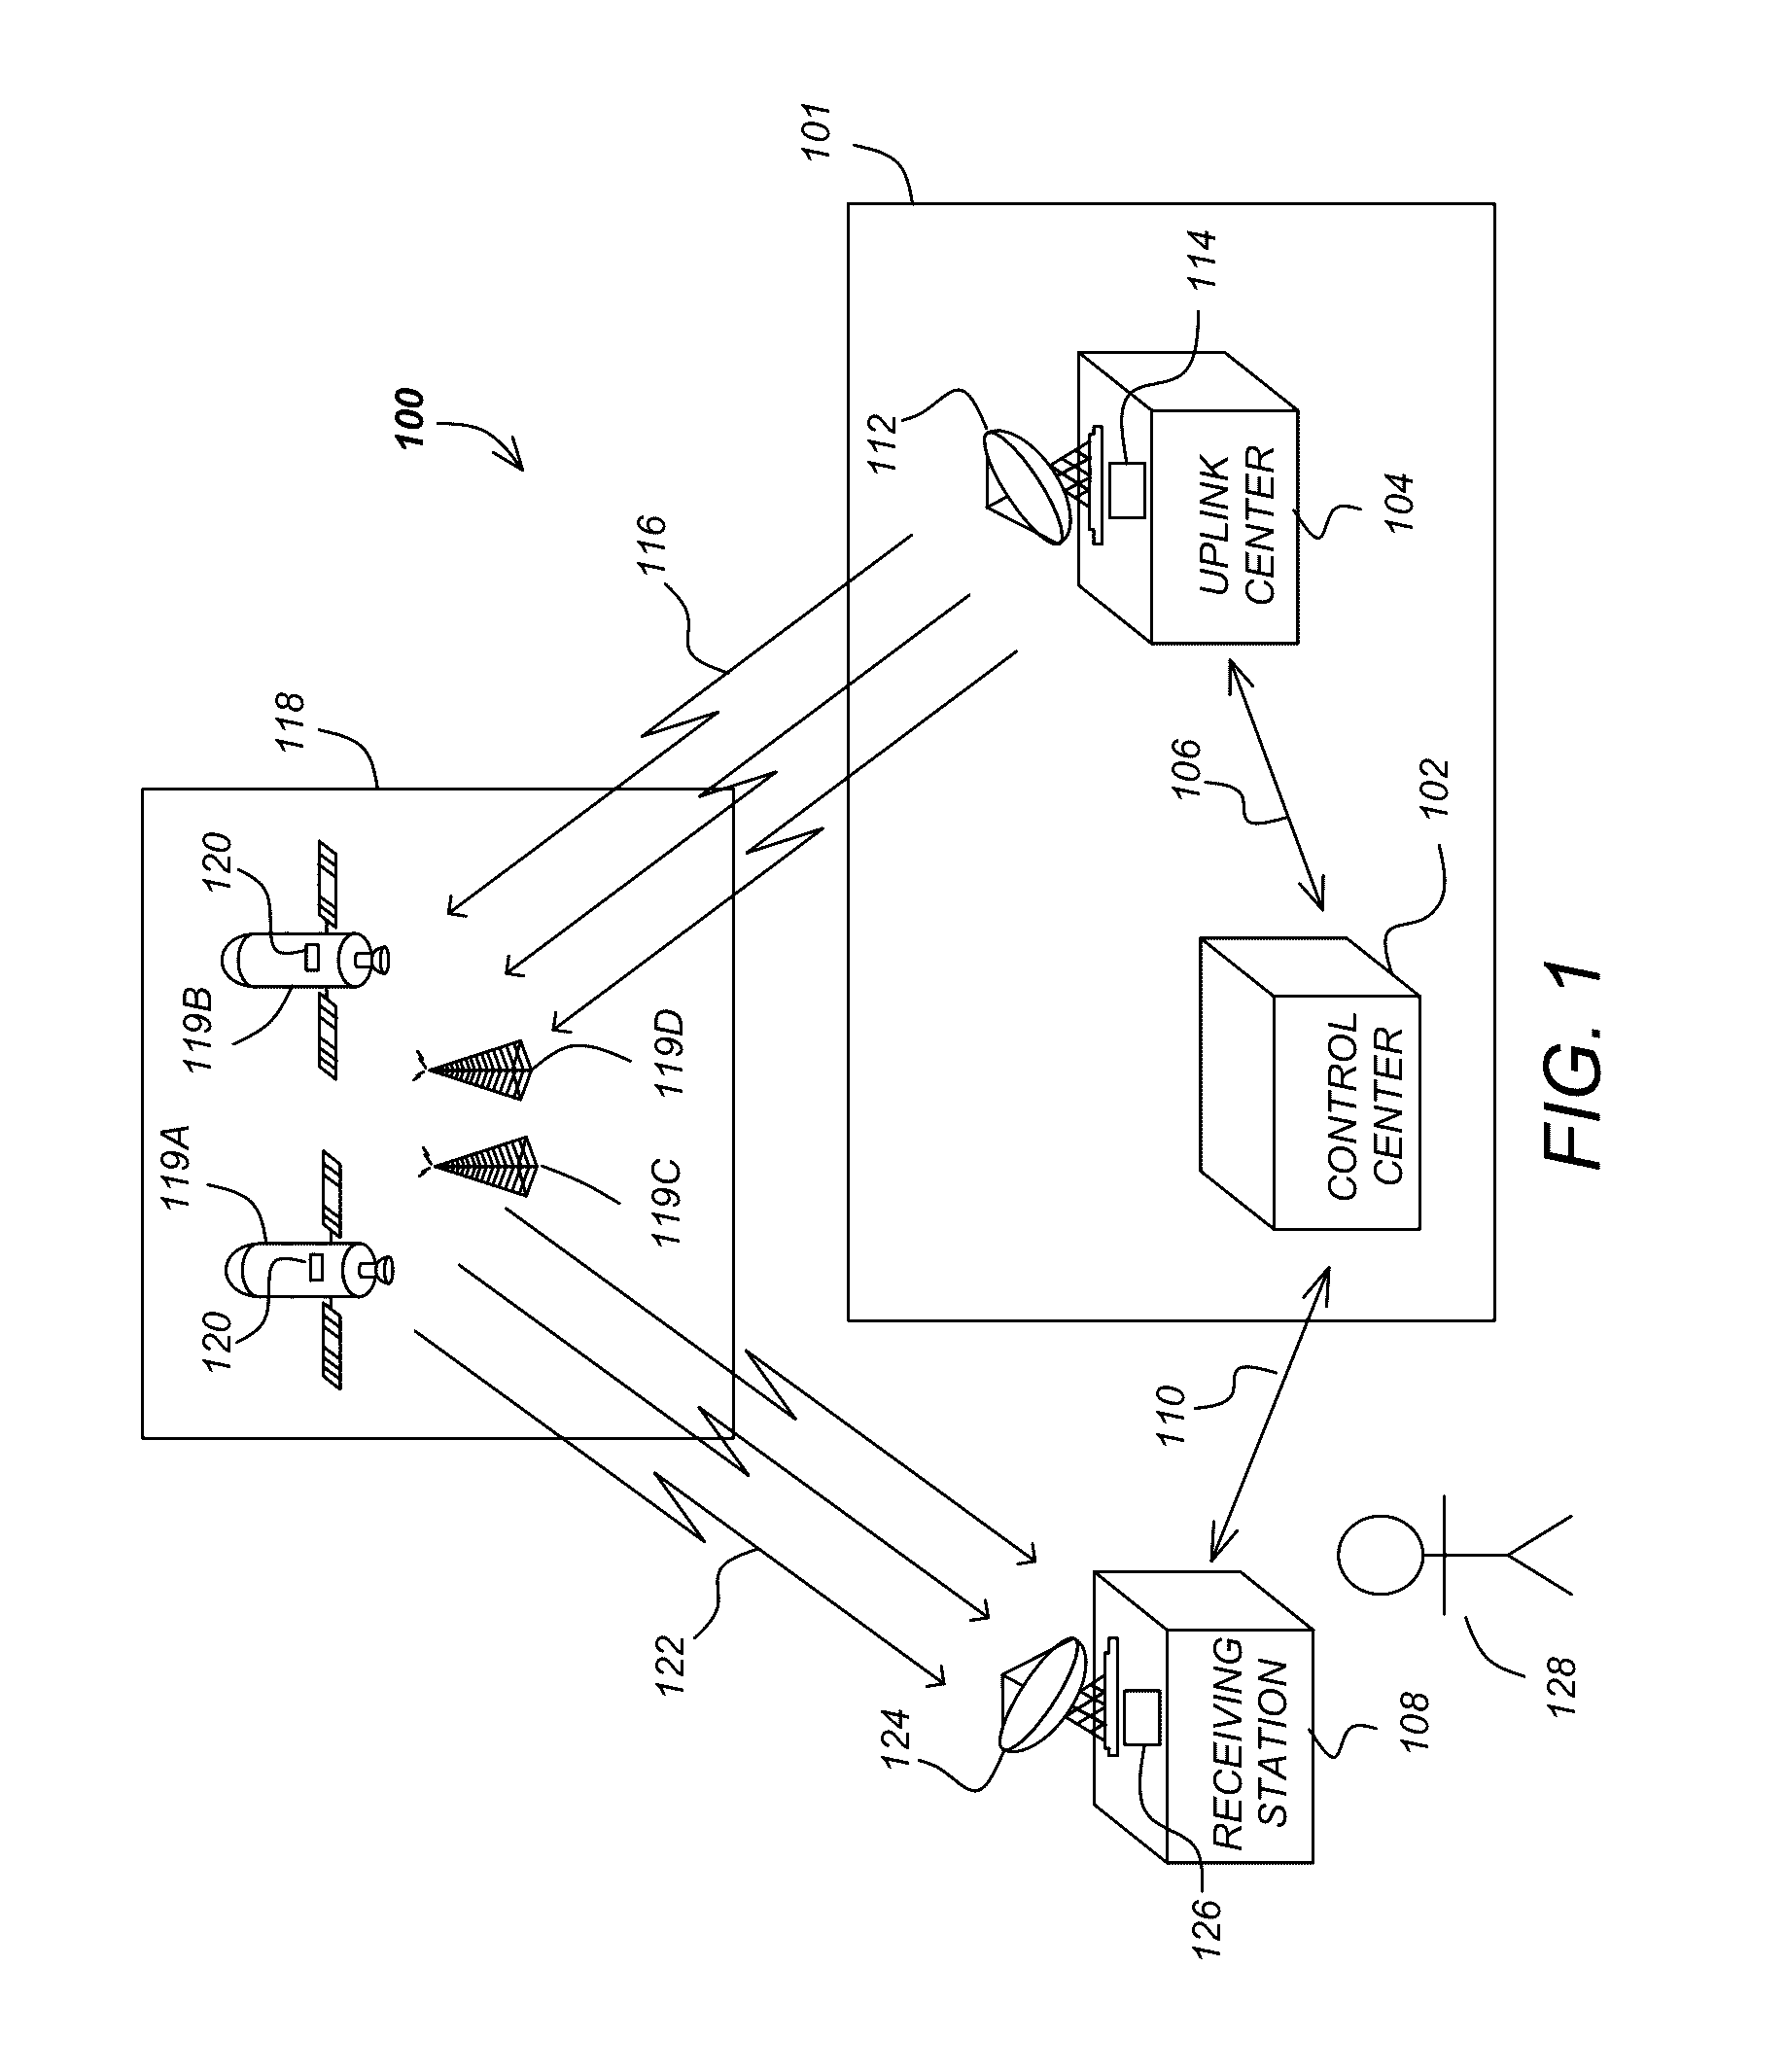 Method and apparatus for transmitting high bandwidth signals with low bandwidth transponders